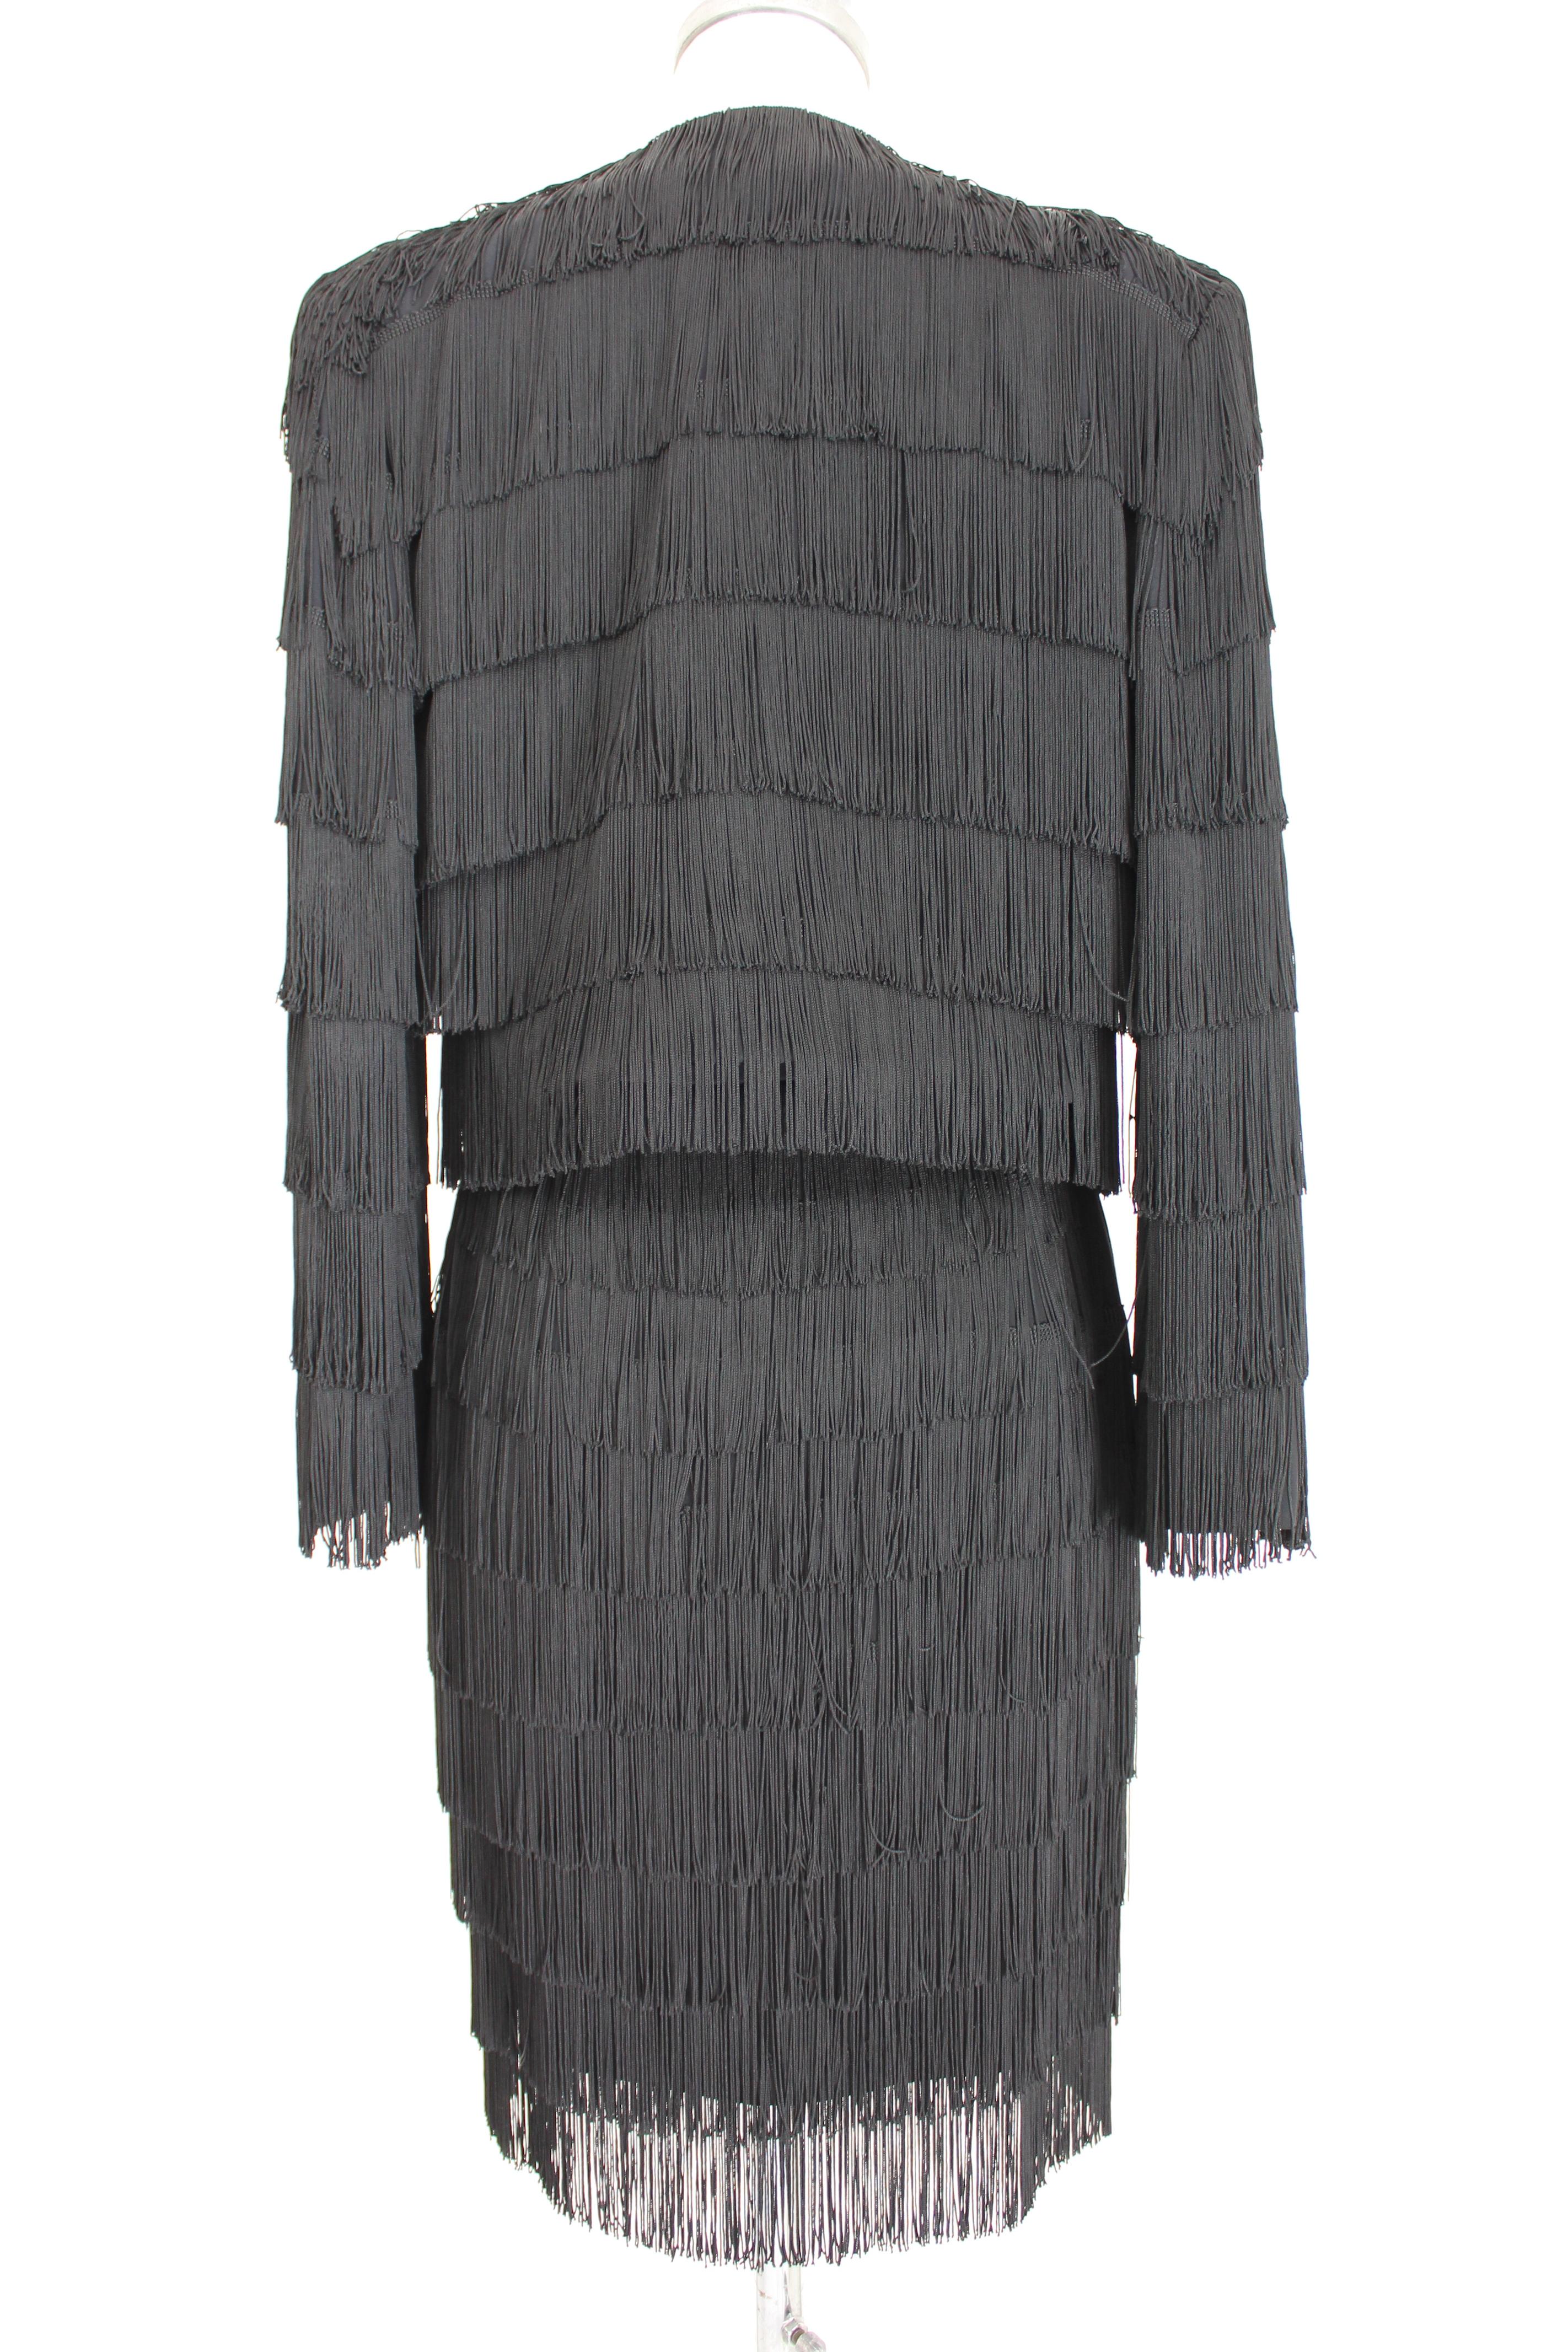 Moschino Couture 90s vintage women's suit. Evening jacket and skirt, black, covered with charleston-style fringes. Straight pencil skirt, short bolero-style jacket. Fabric 55% acetate 45% rayon, internally lined 100% rayon. Made in Italy. Excellent